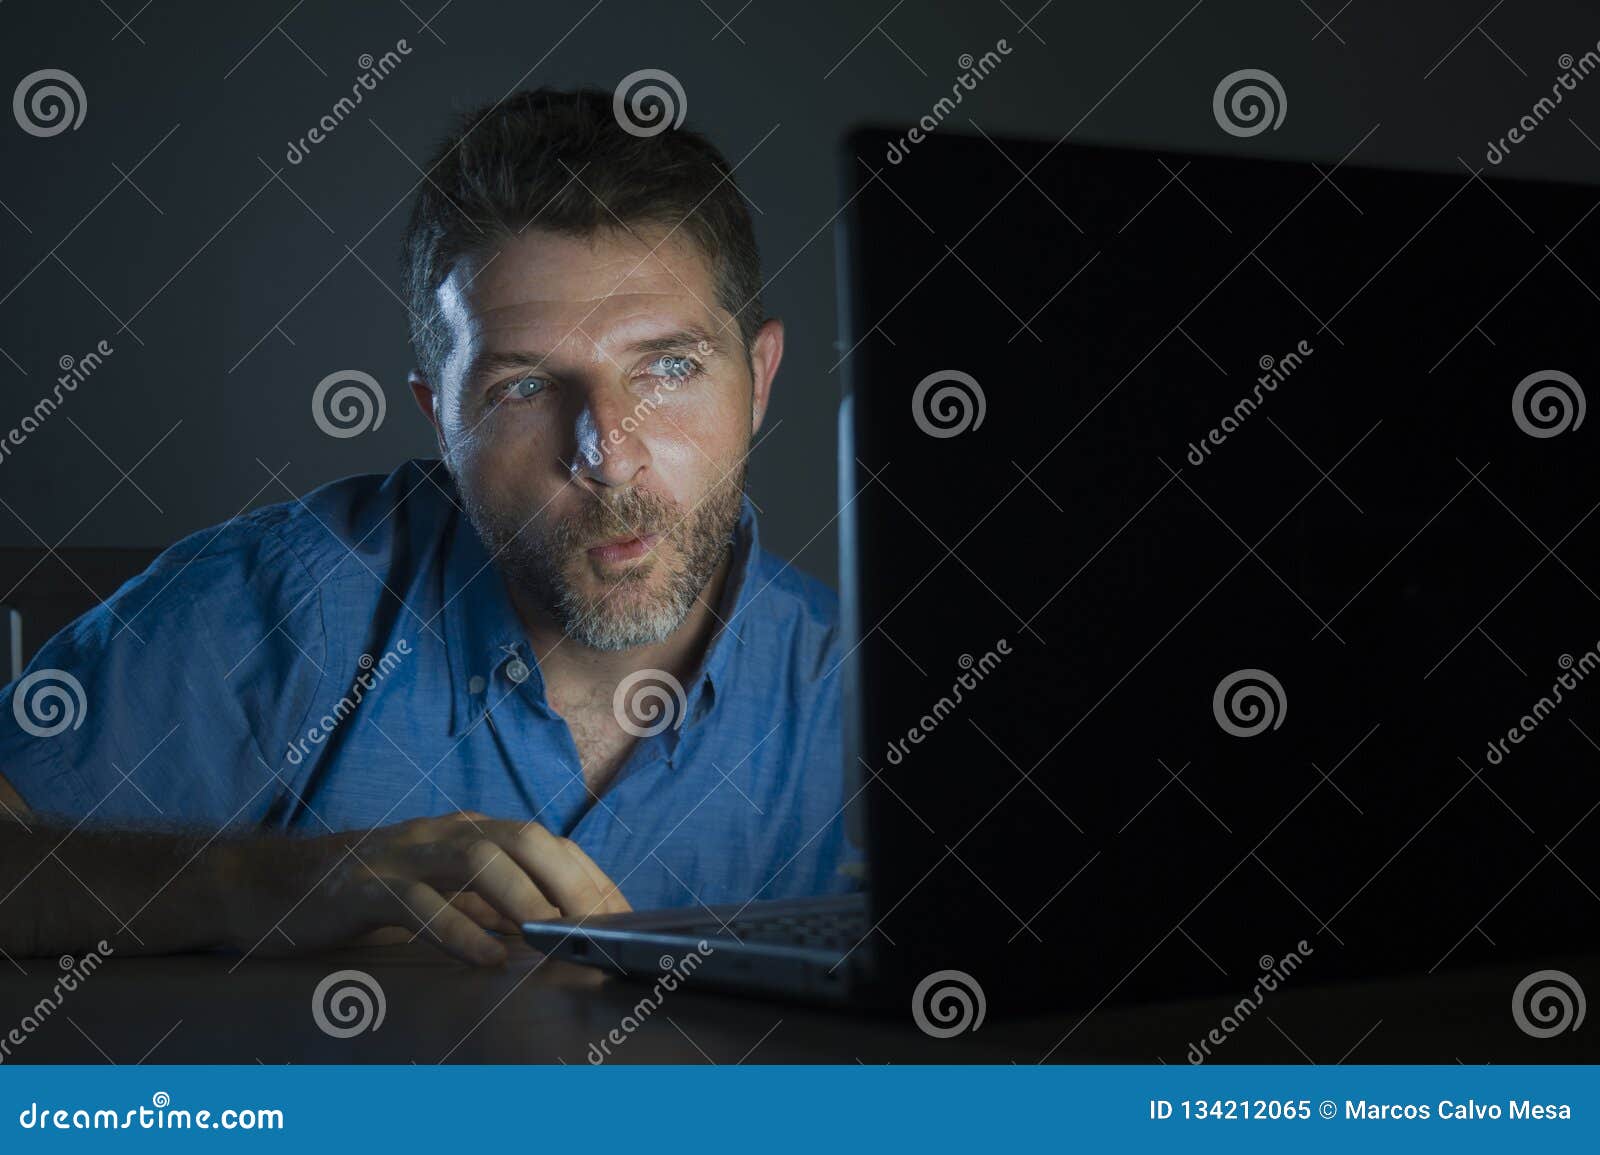 Young Aroused and Excited Sex Addict Man Watching Mobile Online in Laptop Computer Light Night at Home in Stock Image